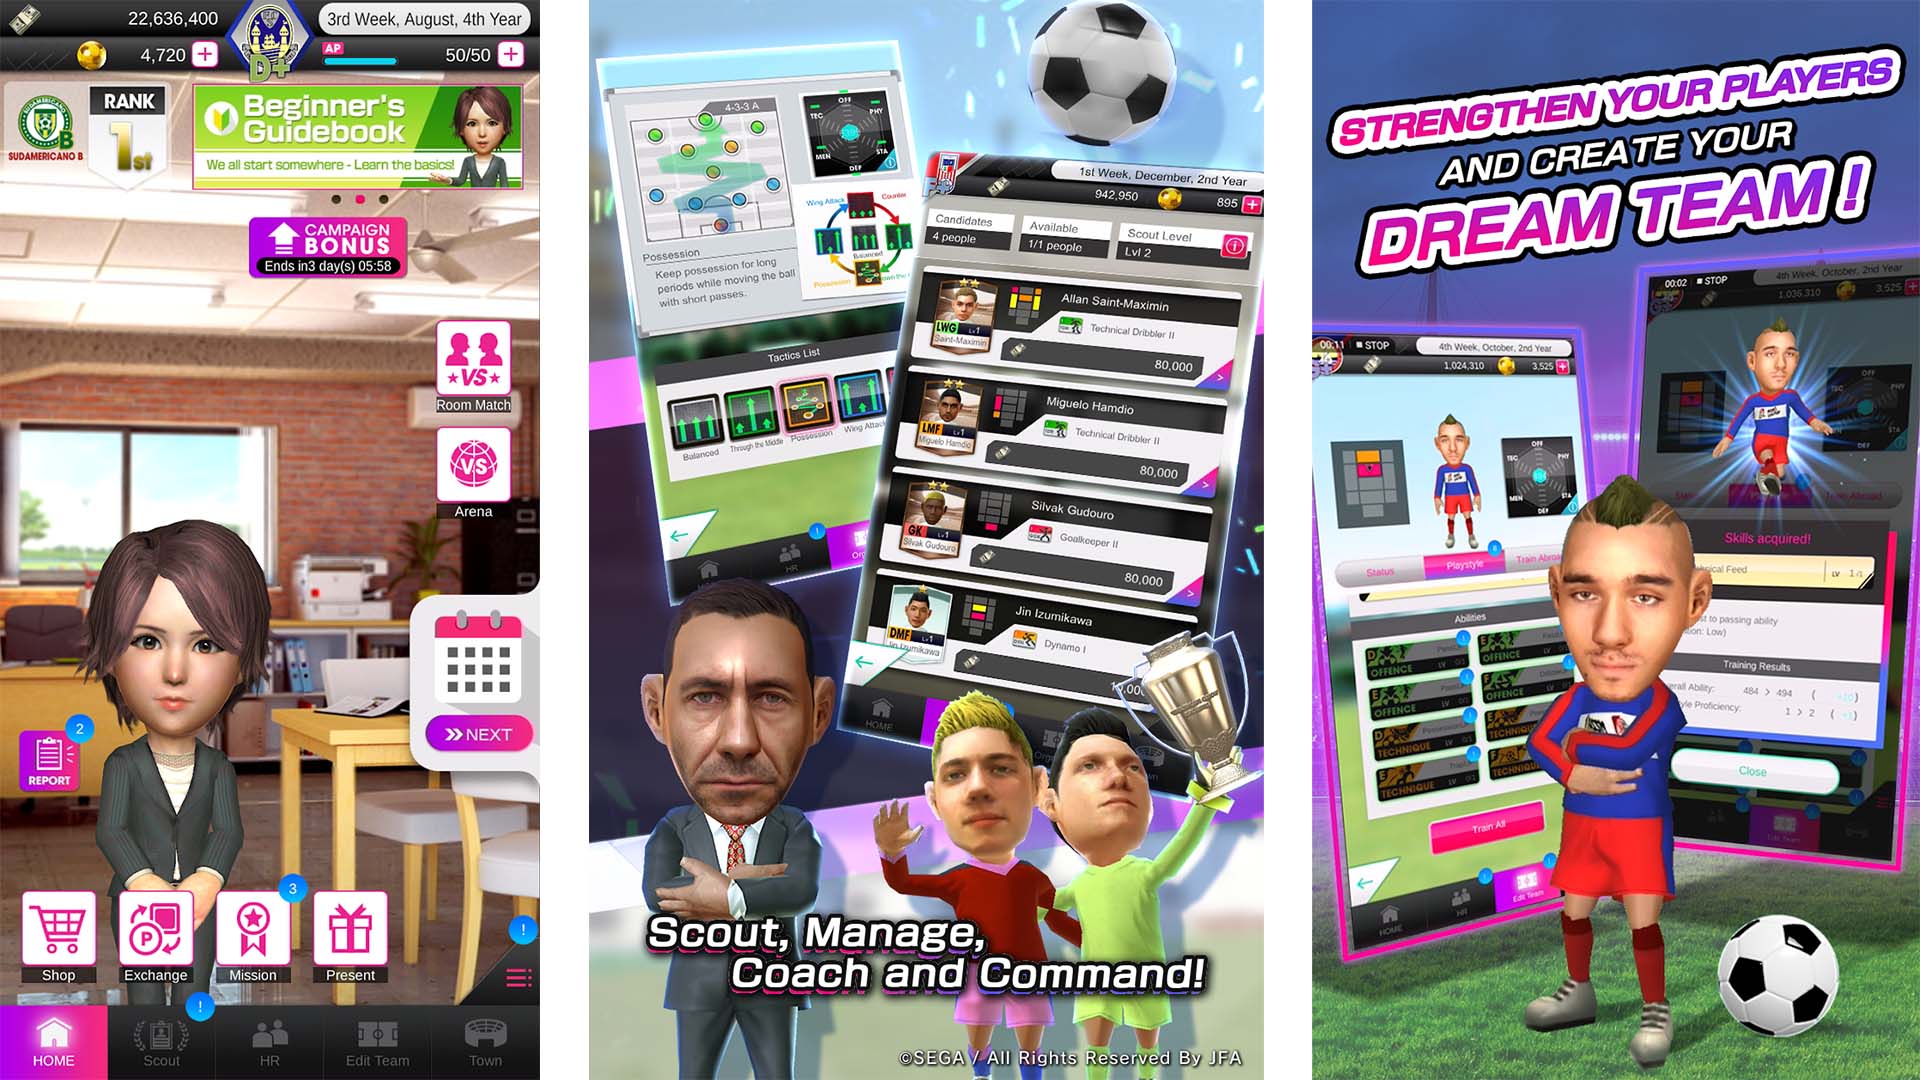 Best Free Football Games On Android And iOS